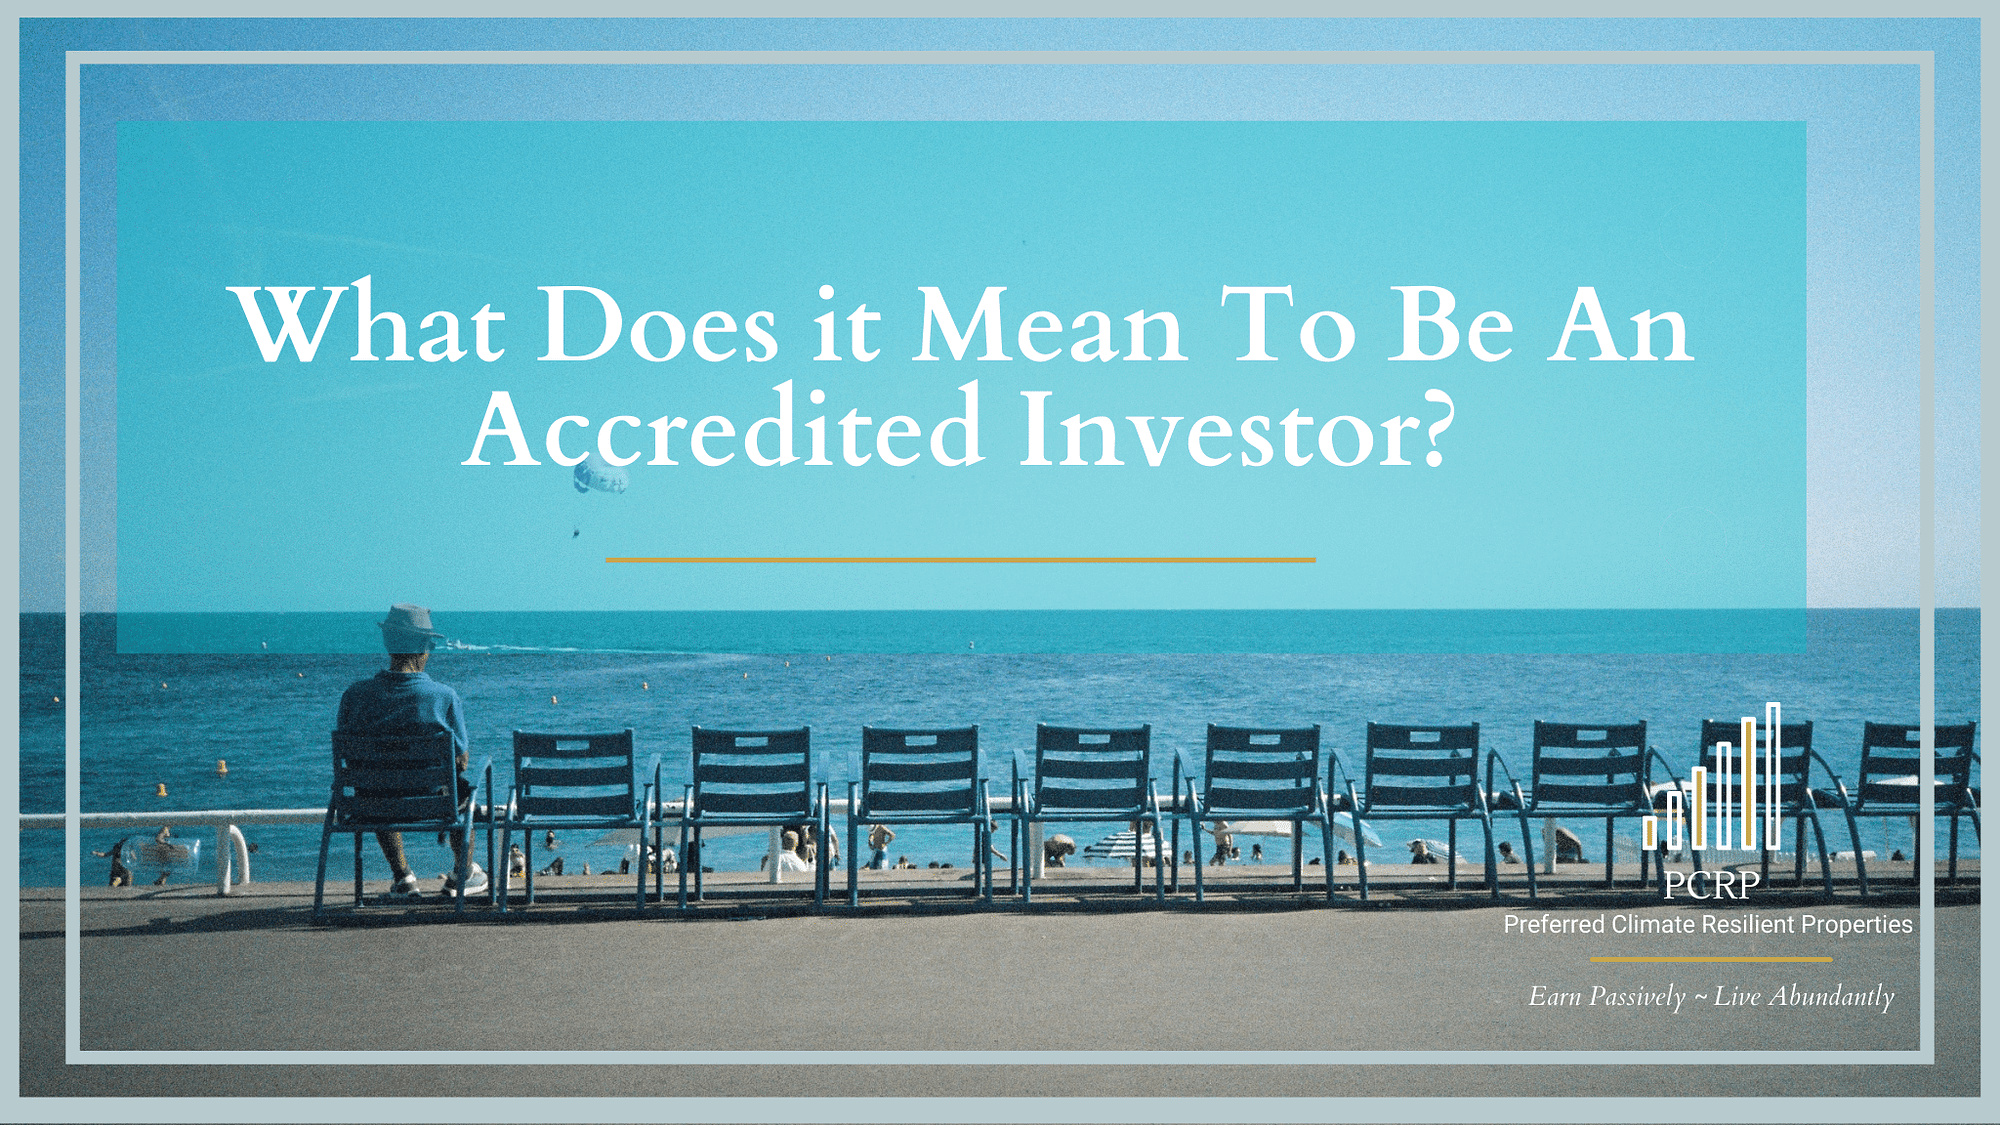 What does it mean to be an accredited investor